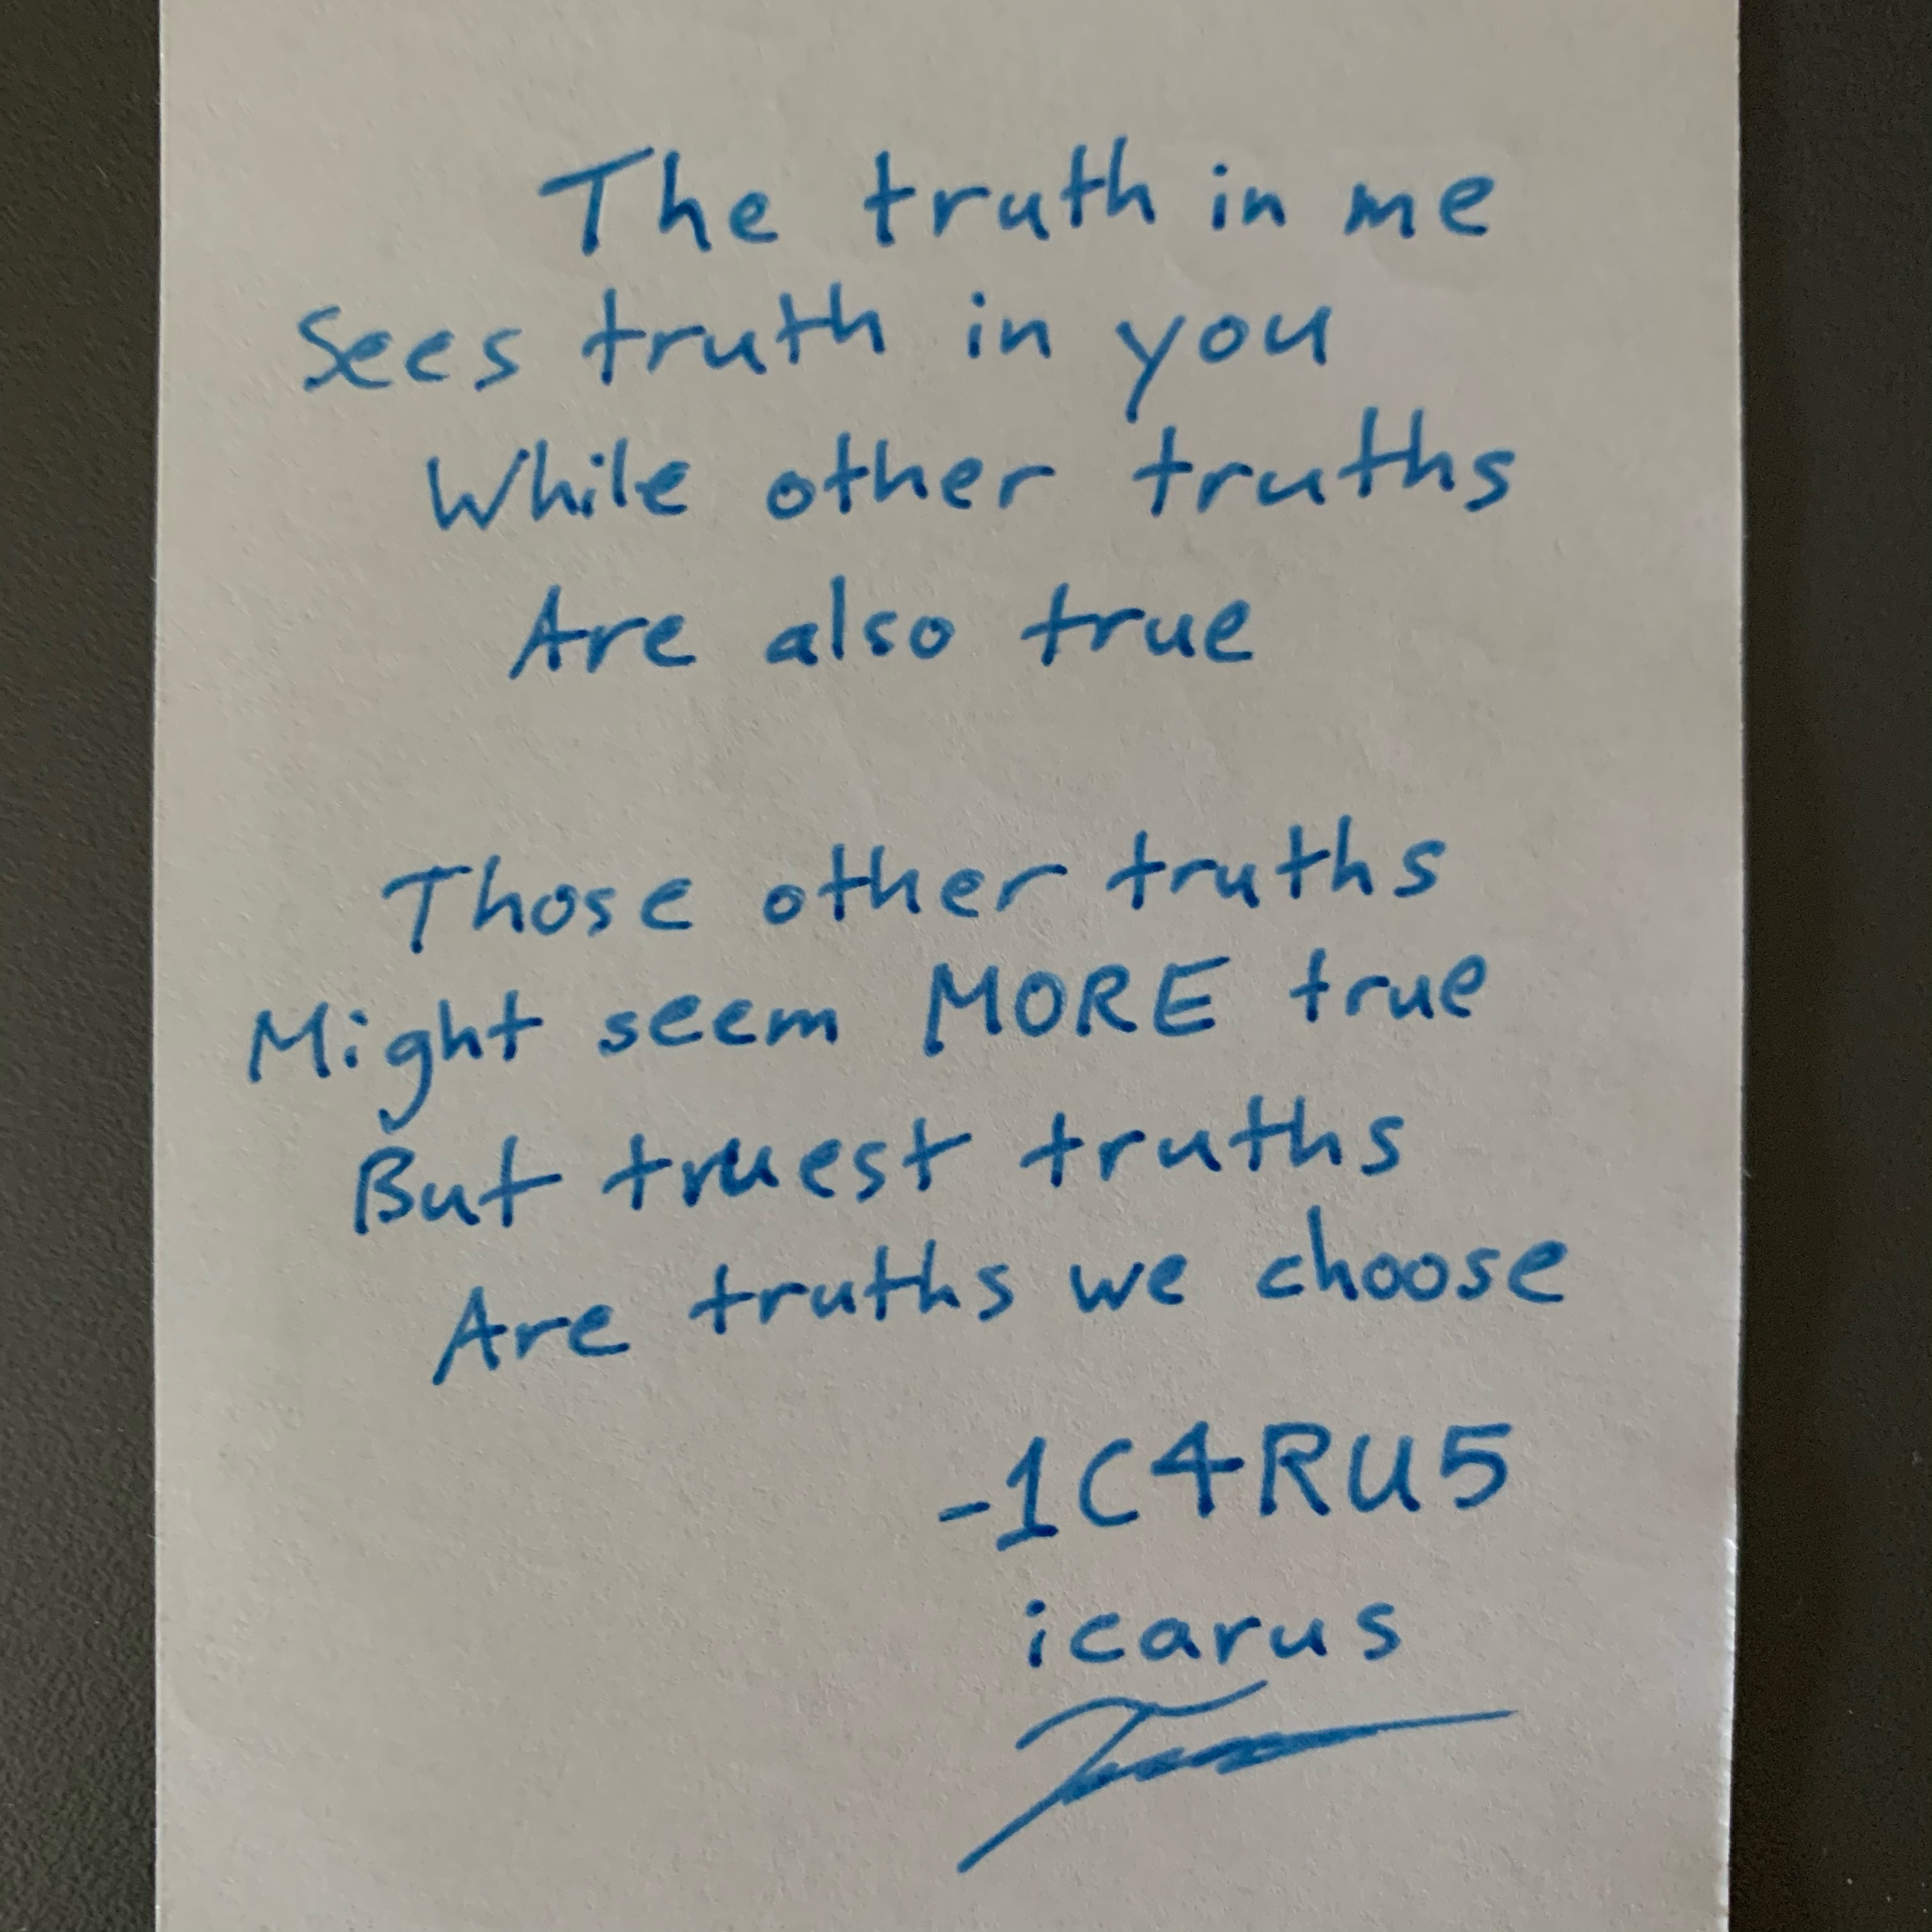 Edition 1 of 2 Poem: "Truest Truths" (NFT #6) by 1C4RU5 (icarus, a.k.a. Tyrone Post) - New NFT Daily 0110